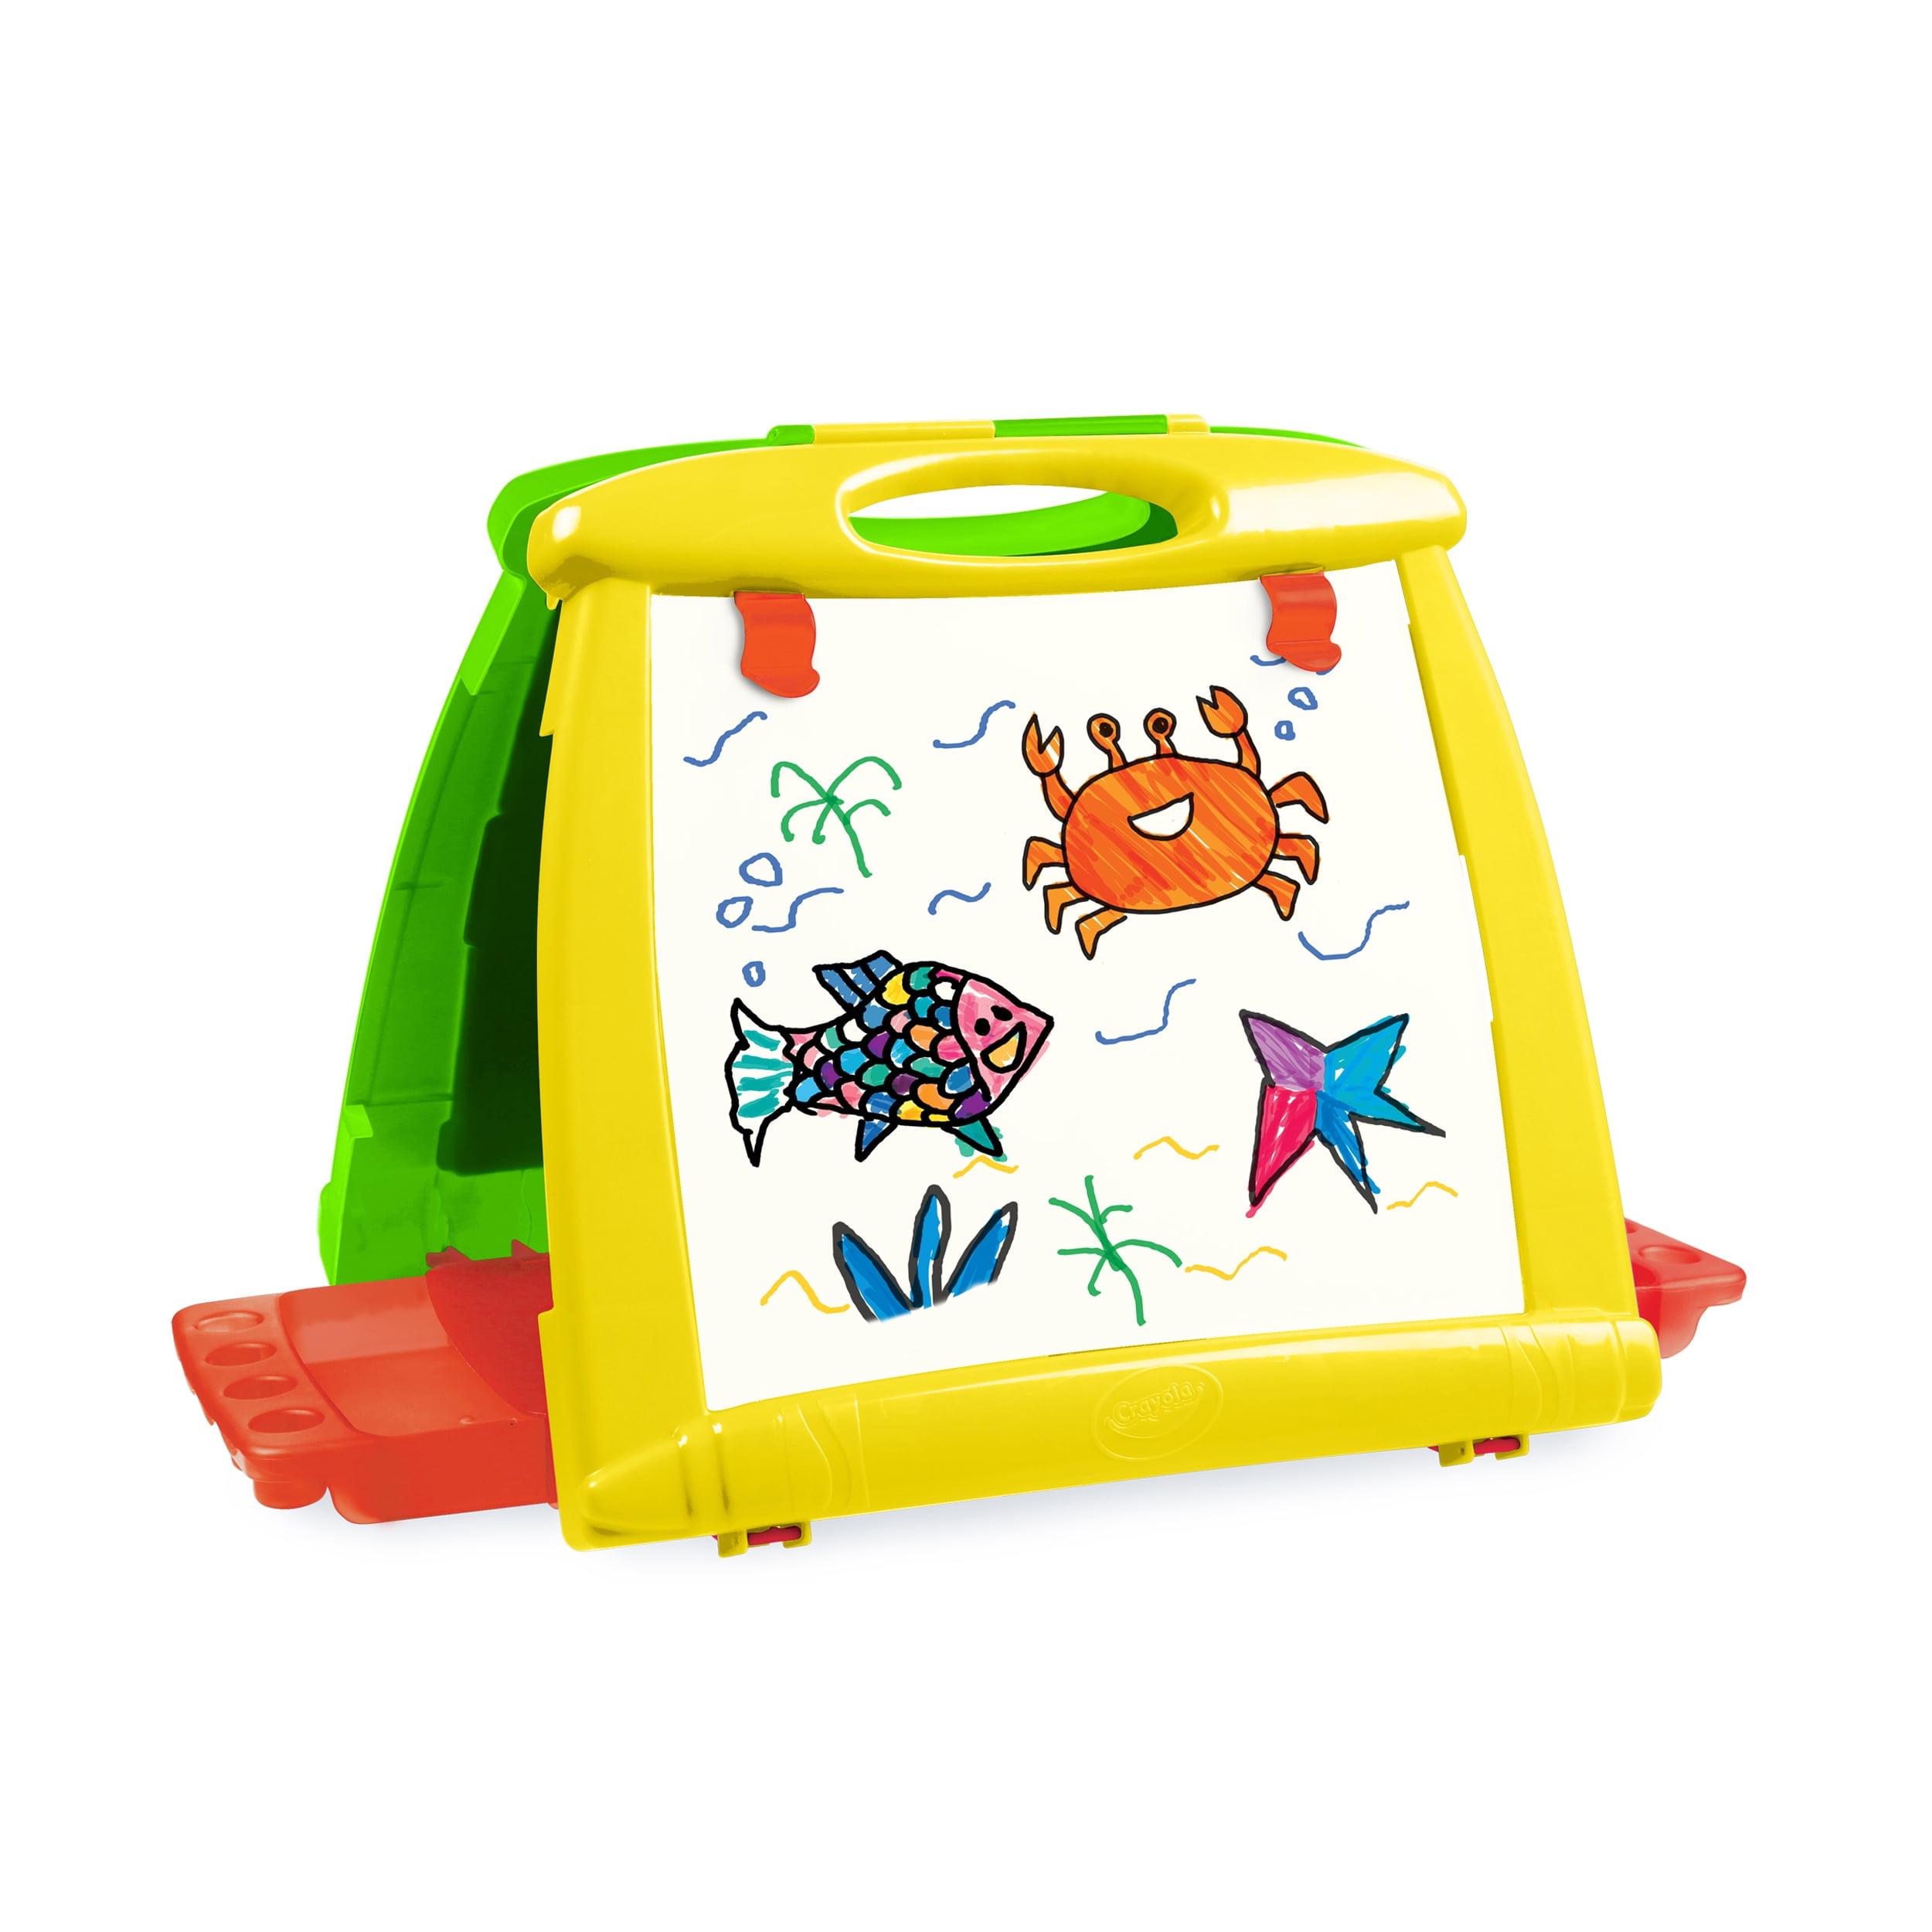 Table Top Easel & Paint Set for Kids, Crayola.com